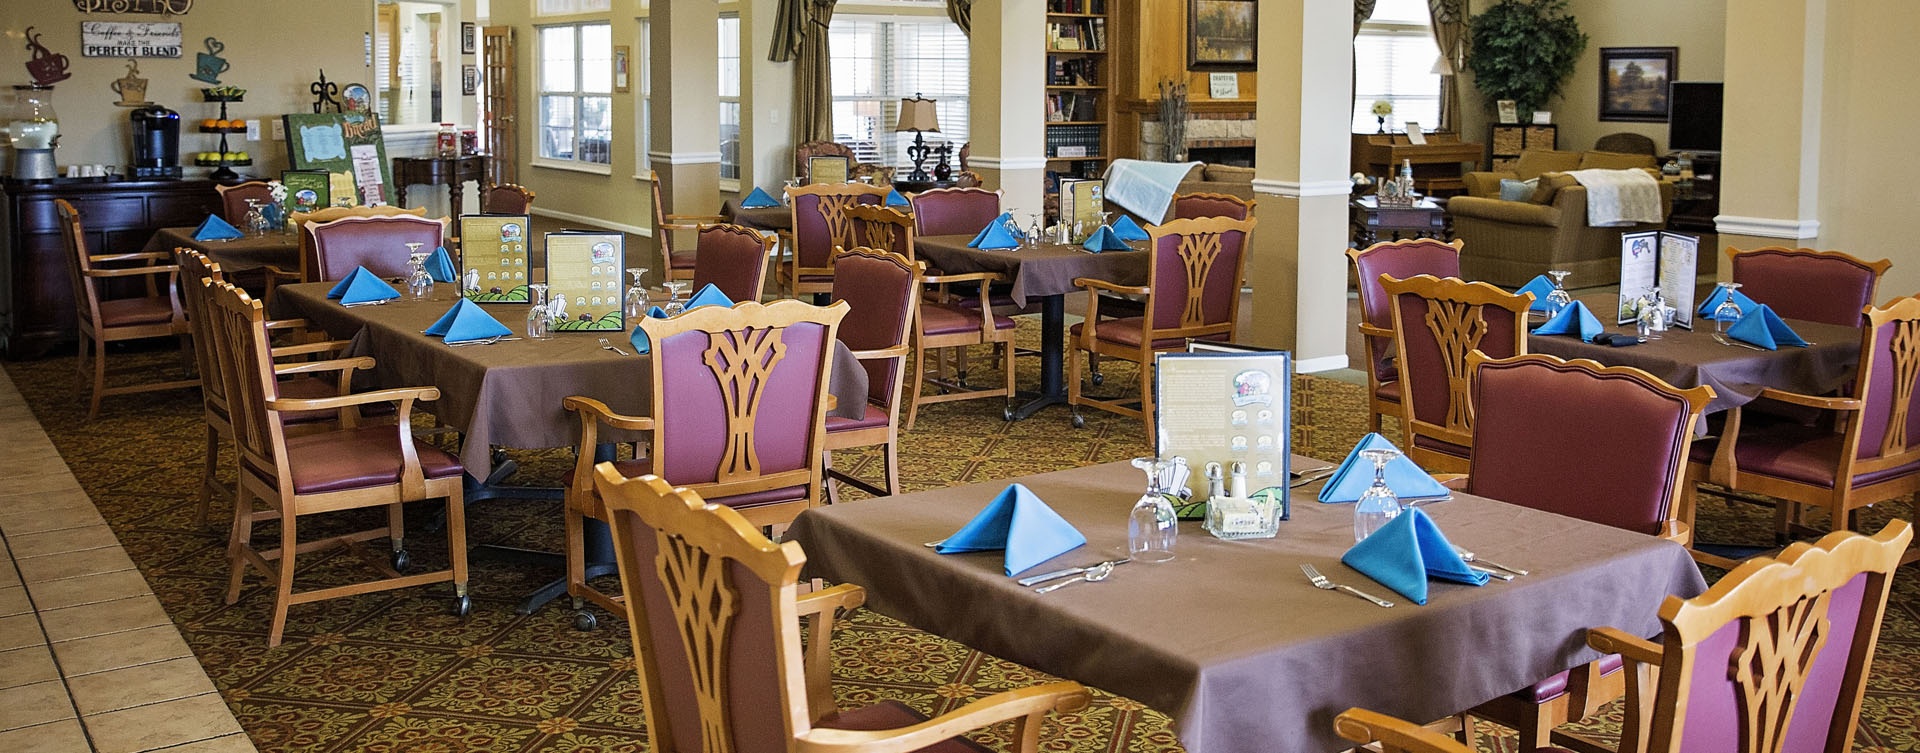 Food is best when shared with friends in the dining room at Bickford of Grand Island